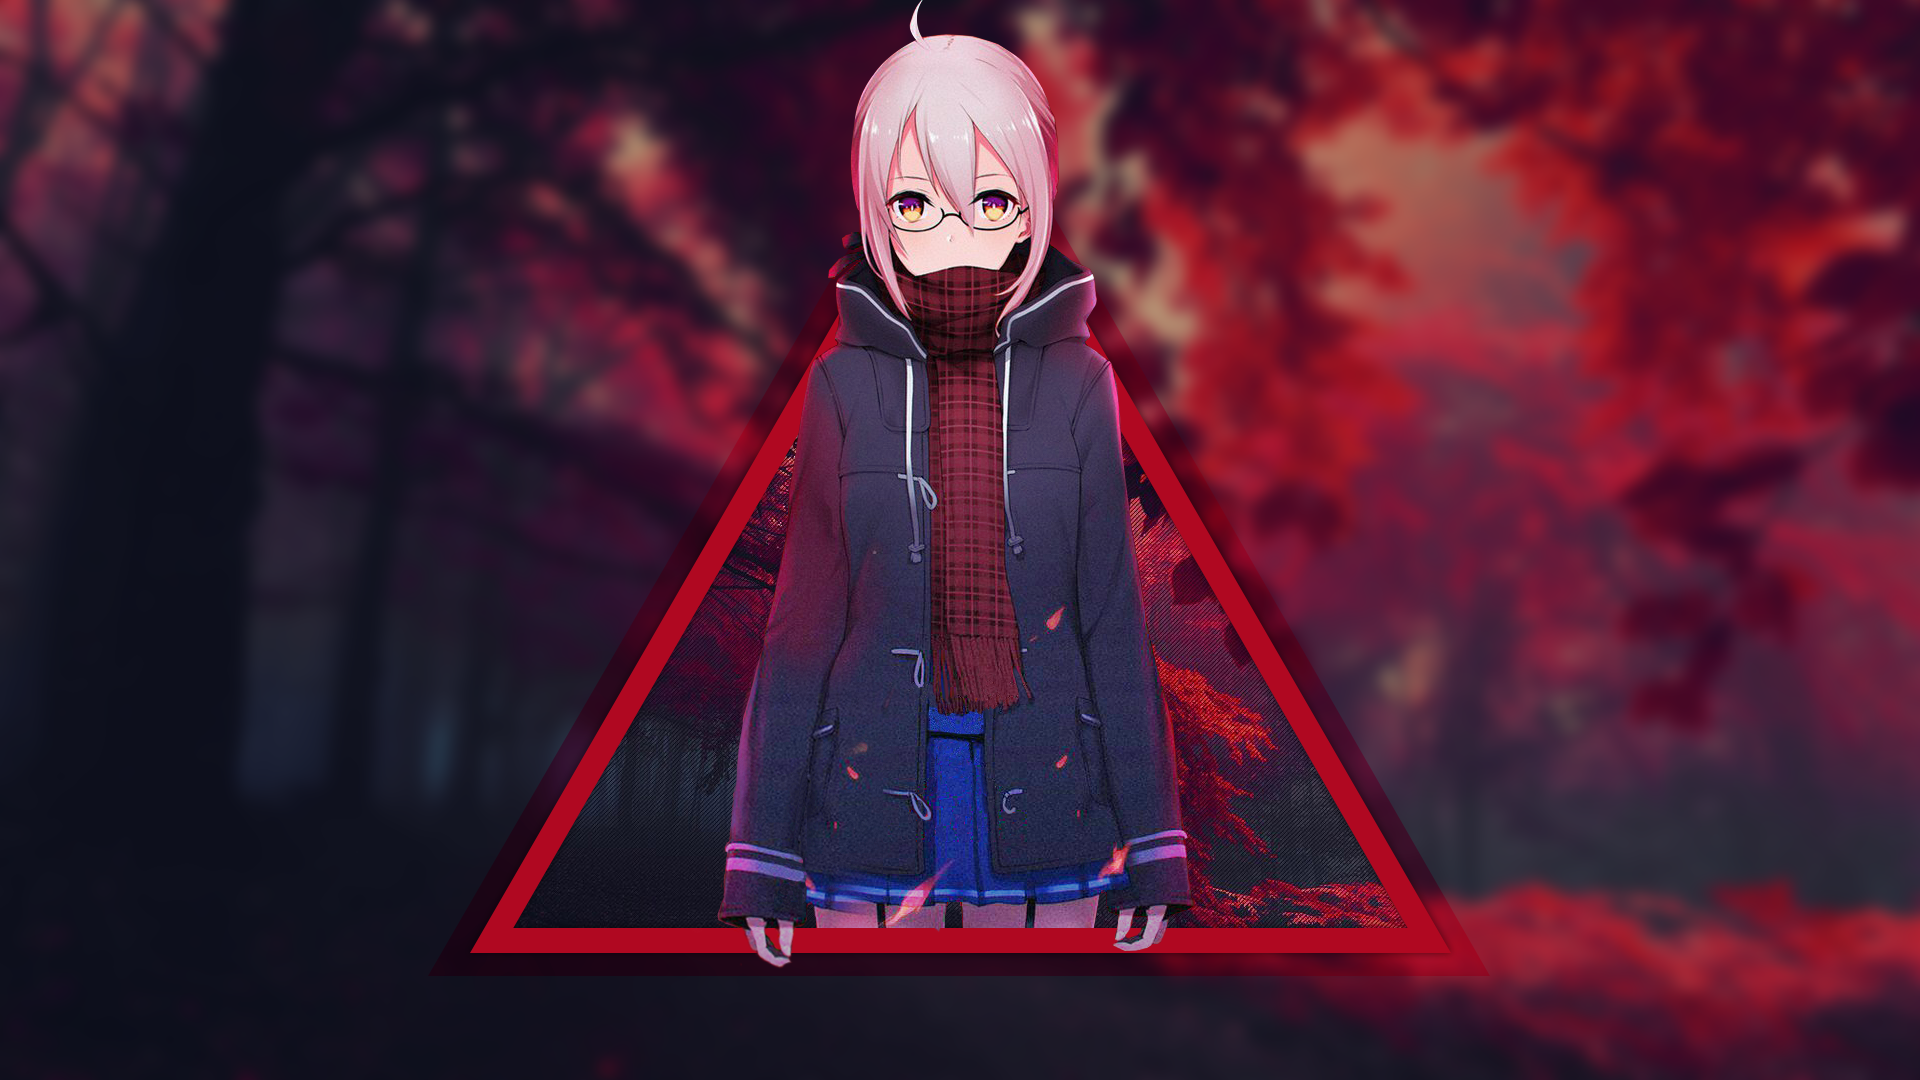 Red Forest Anime Girls Anime Pink Hair Triangle Glasses Mysterious Heroine X Alter Fate Grand Order  1920x1080